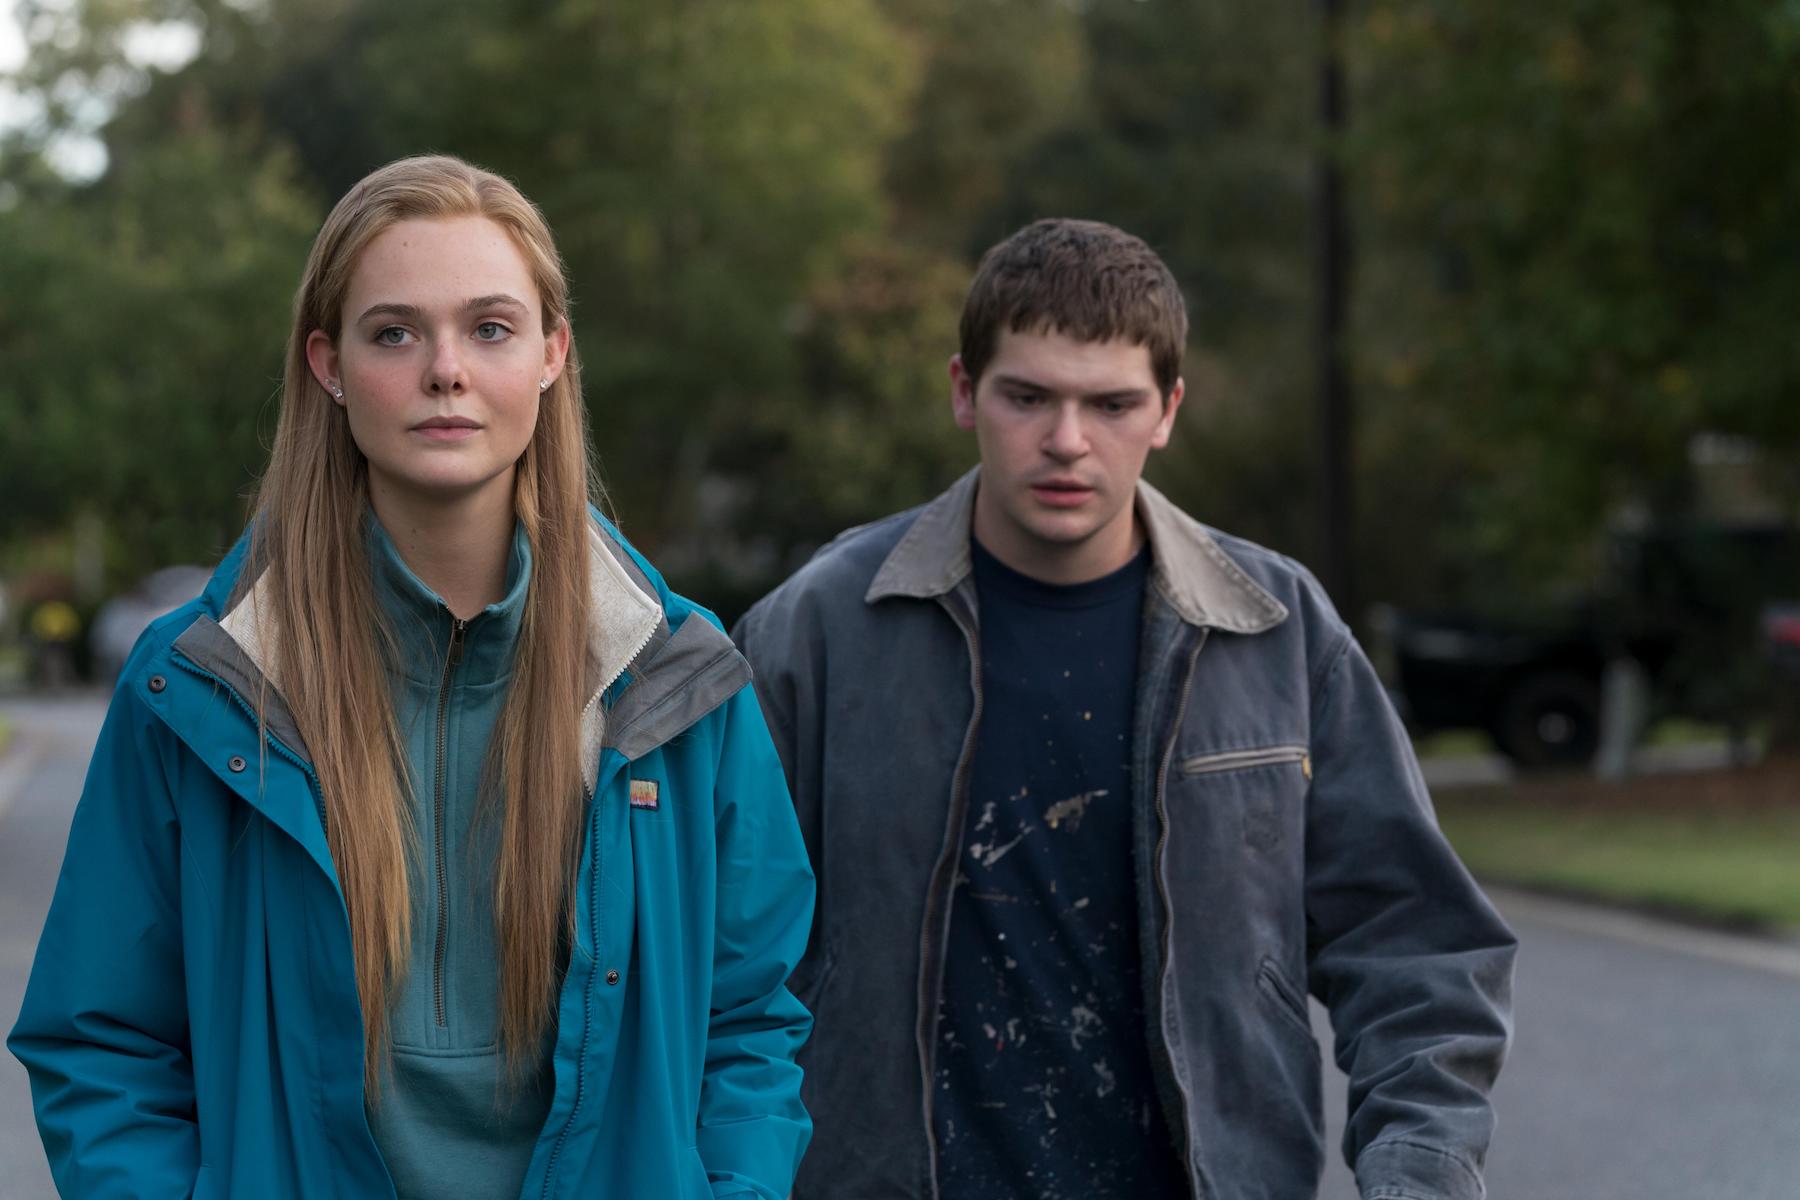 Michelle Carter and Conrad Roy in 'The Girl From Plainville'